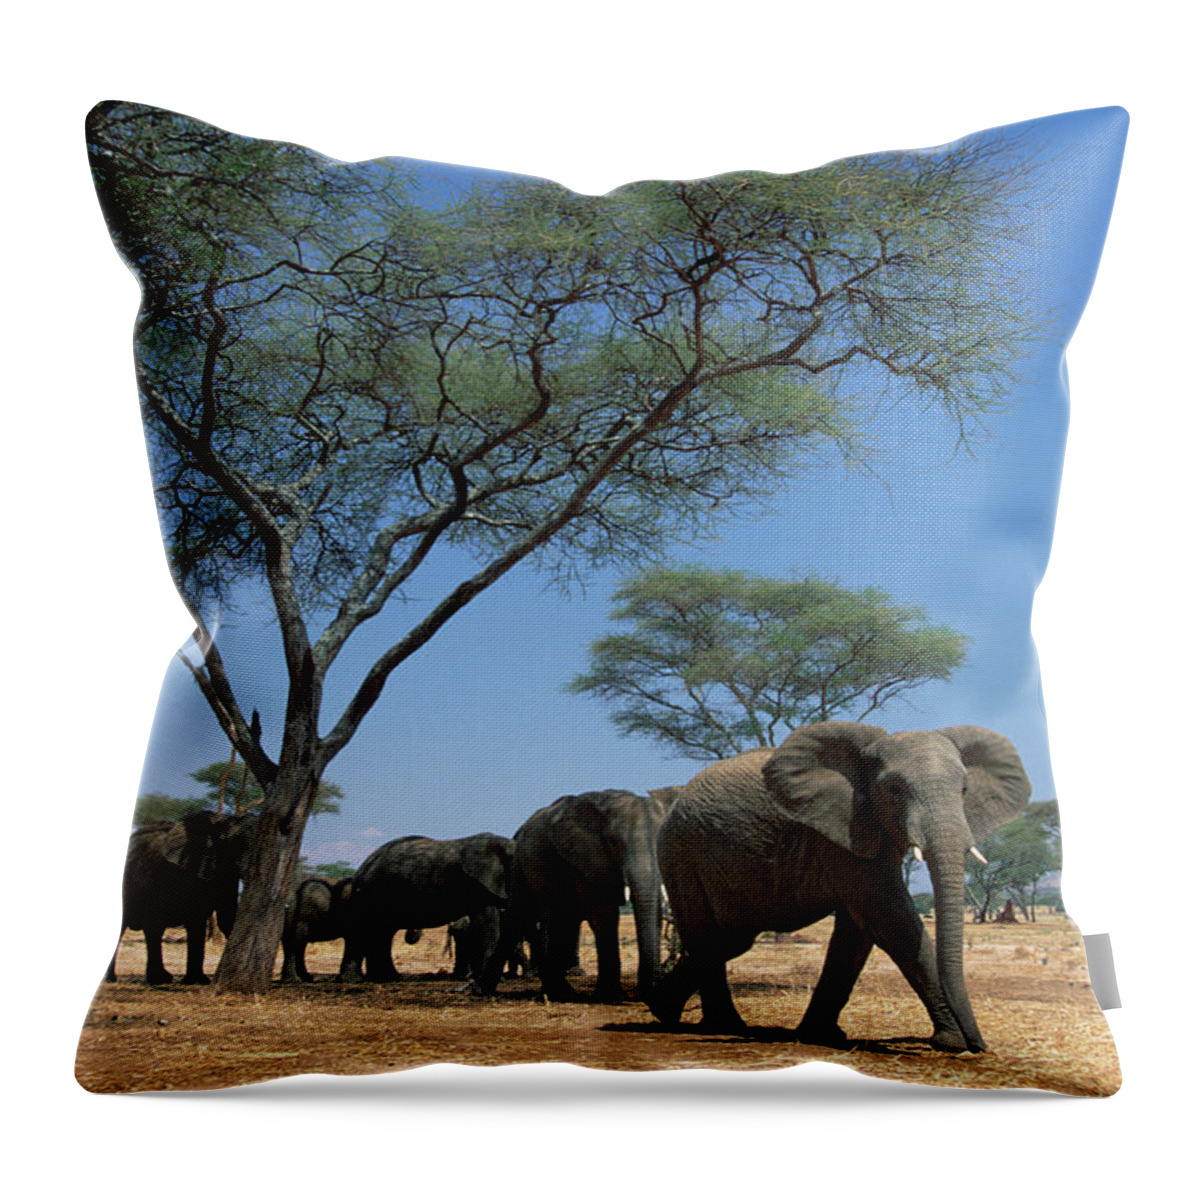 Mp Throw Pillow featuring the photograph African Elephant Loxodonta Africana by Gerry Ellis